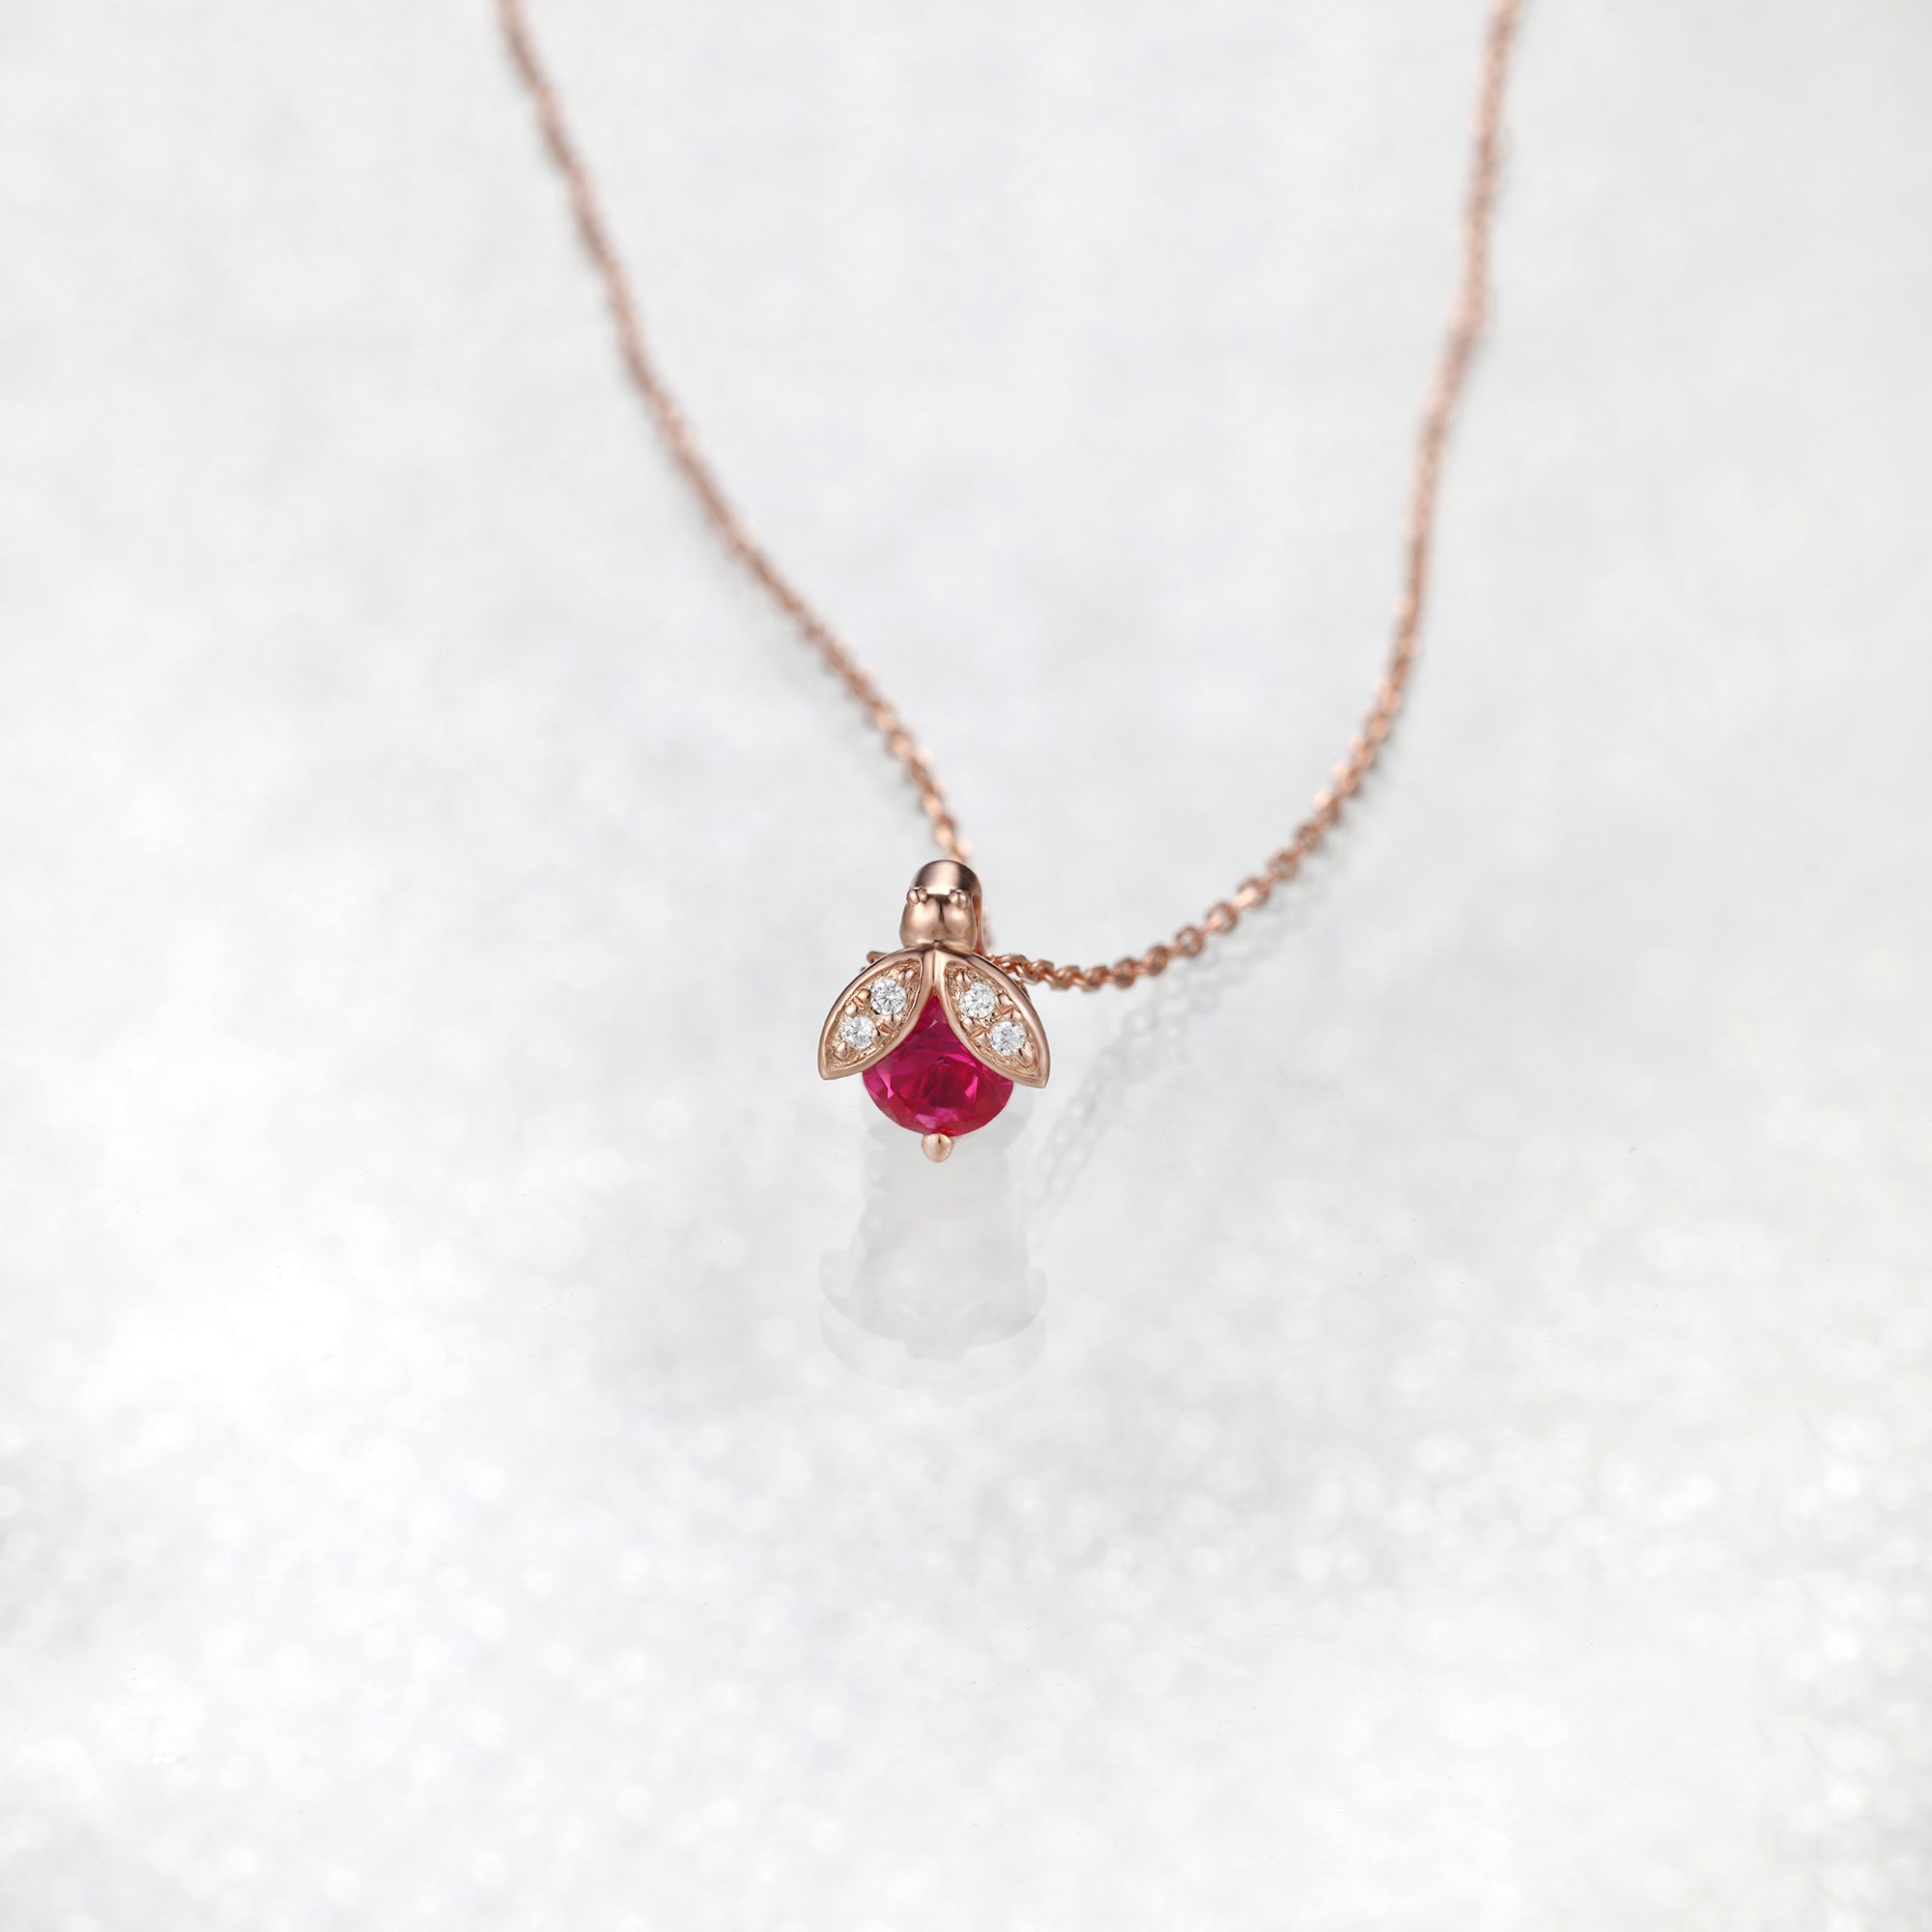 Shop Powerful Little 5.59 CTS African Ruby Heart Pendant | Timeless Design  & Good Fortune